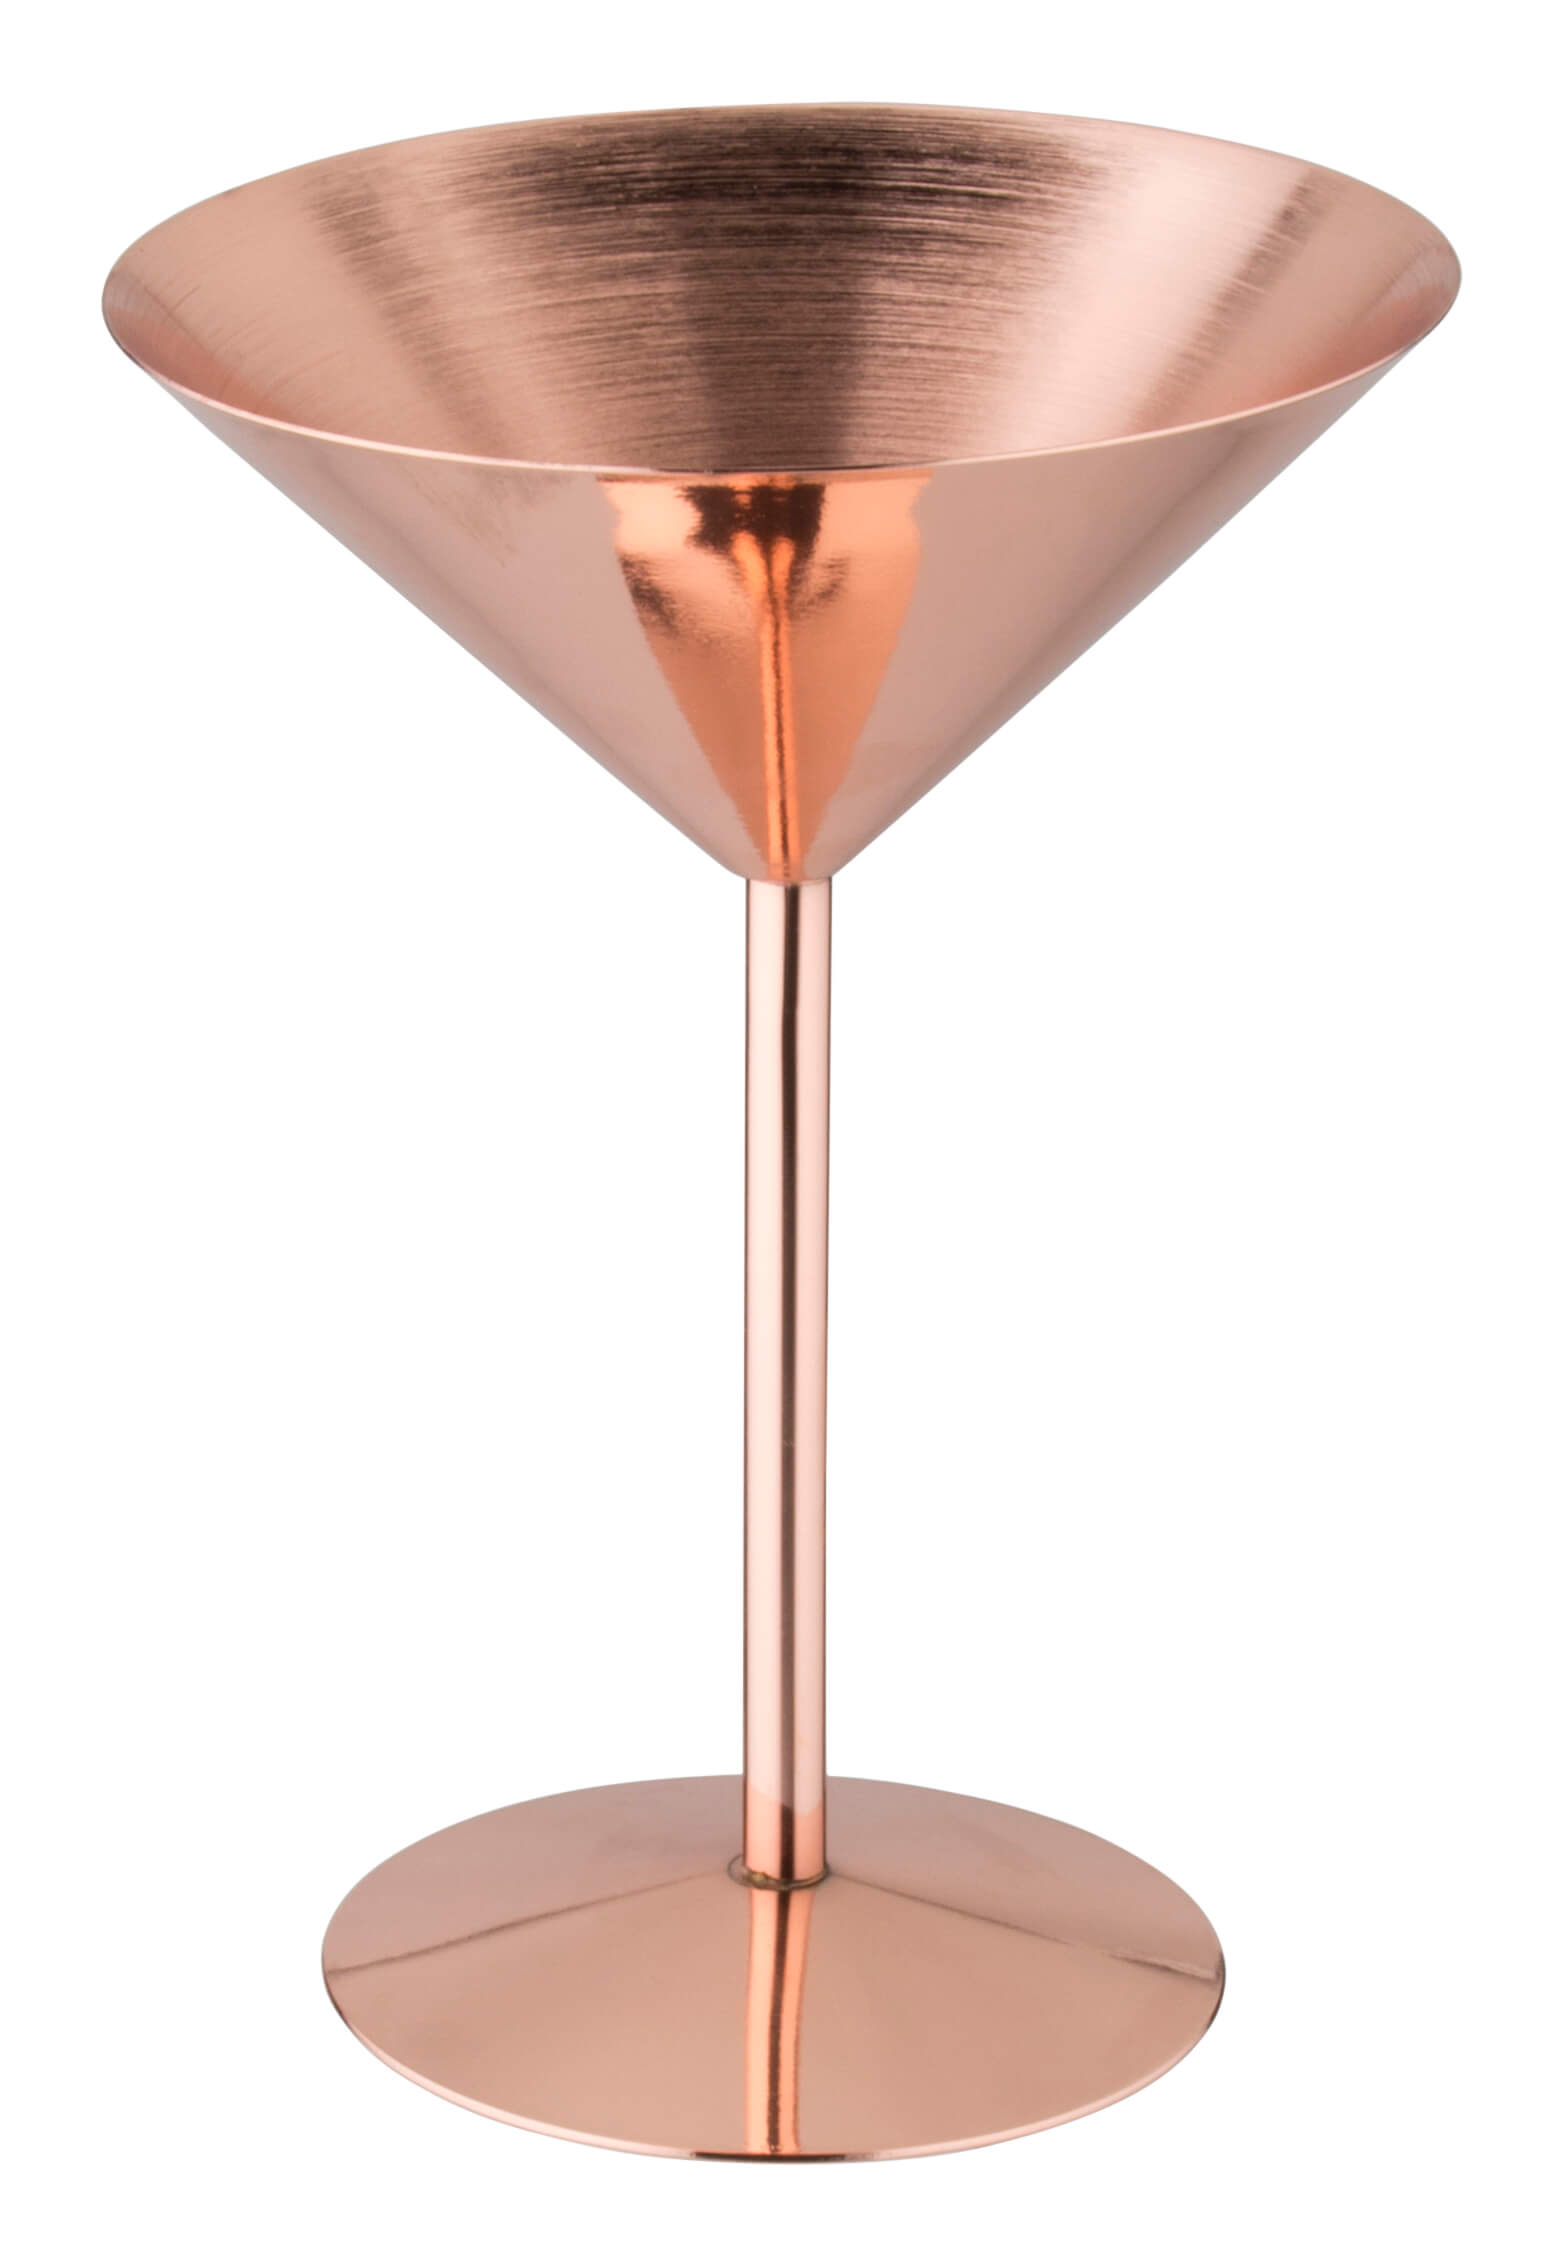 Martini glass, copper plated stainless steel - 240ml